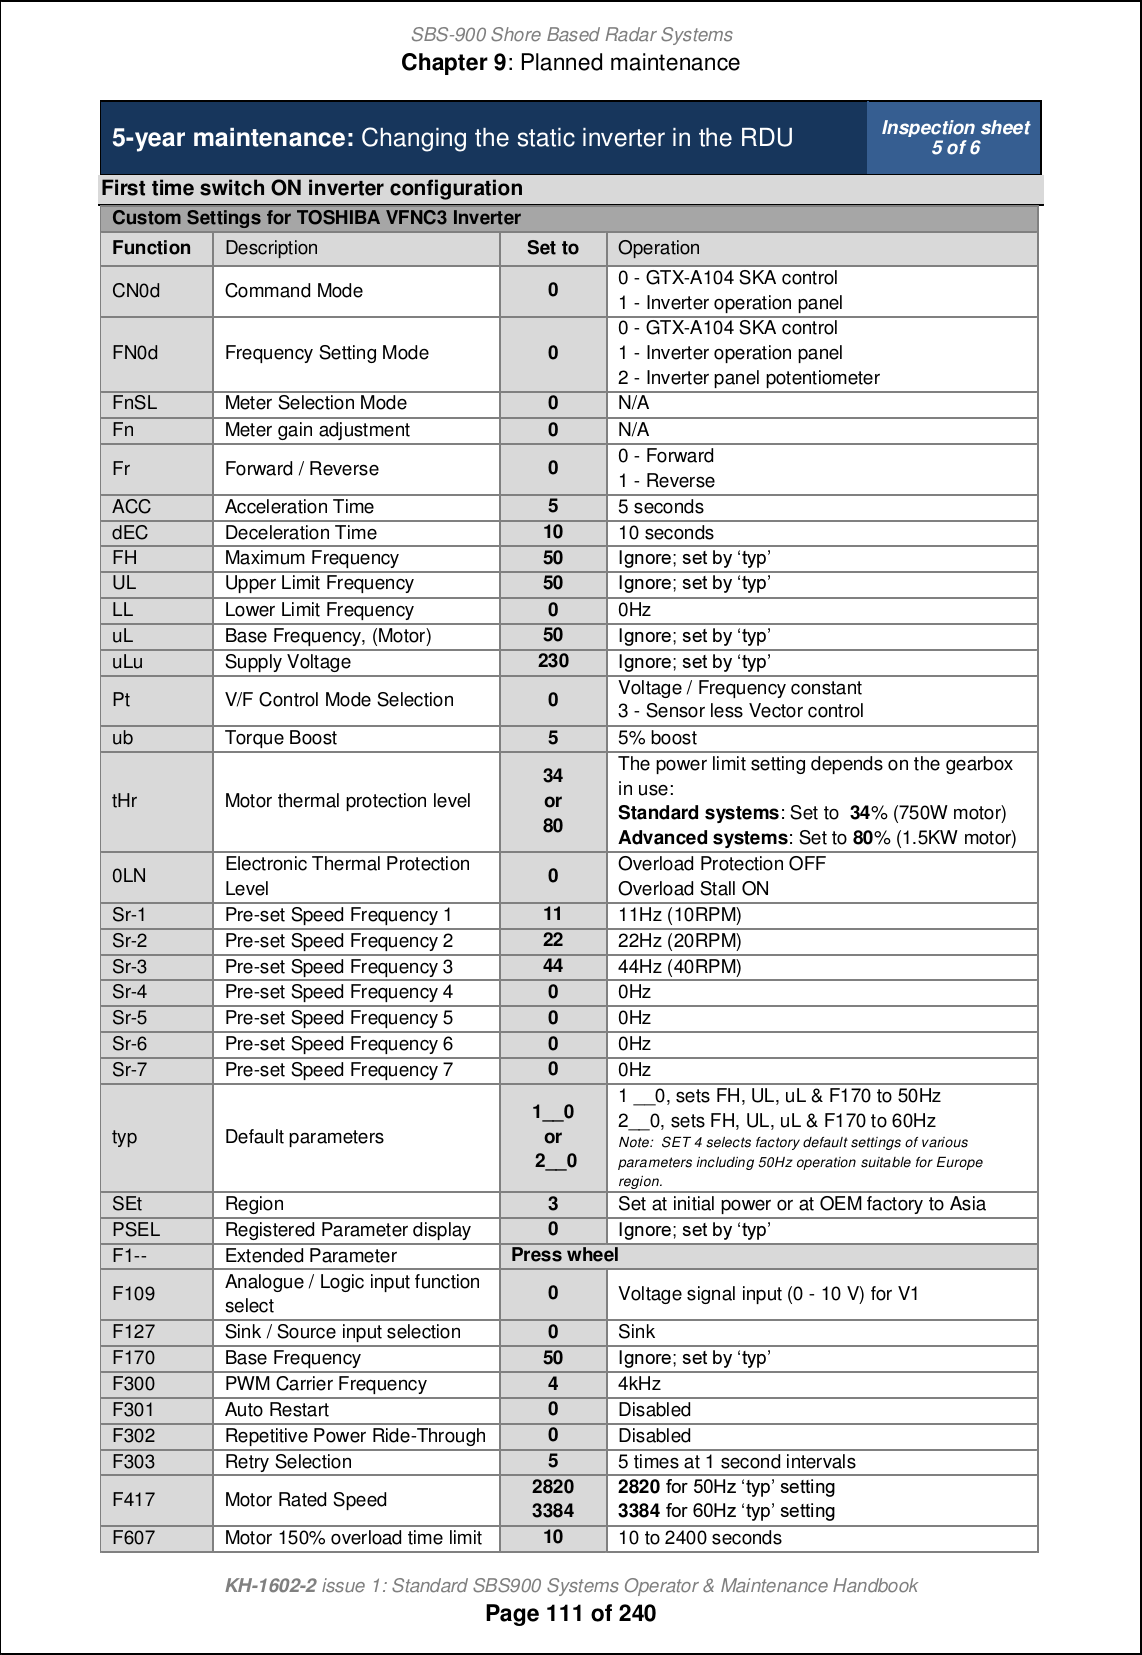 SBS-900 Shore Based Radar SystemsChapter 9: Planned maintenanceKH-1602-2 issue 1: Standard SBS900 Systems Operator &amp; Maintenance HandbookPage 111 of 2405-year maintenance: Changing the static inverter in the RDU Inspection sheet5 of 6First time switch ON inverter configurationCustom Settings for TOSHIBA VFNC3 InverterFunction Description Set to OperationCN0d Command Mode 00 - GTX-A104 SKA control1 - Inverter operation panelFN0d Frequency Setting Mode 00 - GTX-A104 SKA control1 - Inverter operation panel2 - Inverter panel potentiometerFnSL Meter Selection Mode 0N/AFn Meter gain adjustment 0N/AFr Forward / Reverse 00 - Forward1 - ReverseACC Acceleration Time55 secondsdEC Deceleration Time1010 secondsFH Maximum Frequency 50 Hahil_; m_n \s nsjUL Upper Limit Frequency 50 Hahil_; m_n \s nsjLL Lower Limit Frequency 00HzuL Base Frequency, (Motor)50Hahil_; m_n \s nsjuLu Supply Voltage230Hahil_; m_n \s nsjPt V/F Control Mode Selection 0Voltage / Frequency constant3 - Sensor less Vector controlub Torque Boost 55% boosttHr Motor thermal protection level34or80The power limit setting depends on the gearboxin use:Standard systems: Set to 34% (750W motor)Advanced systems: Set to 80% (1.5KW motor)0LN Electronic Thermal ProtectionLevel 0Overload Protection OFFOverload Stall ONSr-1 Pre-set Speed Frequency 11111Hz (10RPM)Sr-2 Pre-set Speed Frequency 22222Hz (20RPM)Sr-3 Pre-set Speed Frequency 34444Hz (40RPM)Sr-4 Pre-set Speed Frequency 4 00HzSr-5 Pre-set Speed Frequency 5 00HzSr-6 Pre-set Speed Frequency 6 00HzSr-7 Pre-set Speed Frequency 700Hztyp Default parameters1__0or2__01 __0, sets FH, UL, uL &amp; F170 to 50Hz2__0, sets FH, UL, uL &amp; F170 to 60HzNote: SET 4 selects factory default settings of variousparameters including 50Hz operation suitable for Europeregion.SEt Region 3Set at initial power or at OEM factory to AsiaPSEL Registered Parameter display0Hahil_; m_n \s nsjF1-- Extended ParameterPresswheelF109 Analogue / Logic input functionselect 0Voltage signal input (0 - 10 V) for V1F127 Sink / Source input selection 0SinkF170 Base Frequency 50 Hahil_; m_n \s nsjF300 PWM Carrier Frequency 44kHzF301 Auto Restart0DisabledF302 Repetitive Power Ride-Through0DisabledF303 Retry Selection55 times at 1 second intervalsF417 Motor Rated Speed 28203384 2820 `il 4/Gt nsj m_nncha3384 `il 5/Gt nsj m_nnchaF607 Motor 150% overload time limit1010 to 2400 seconds